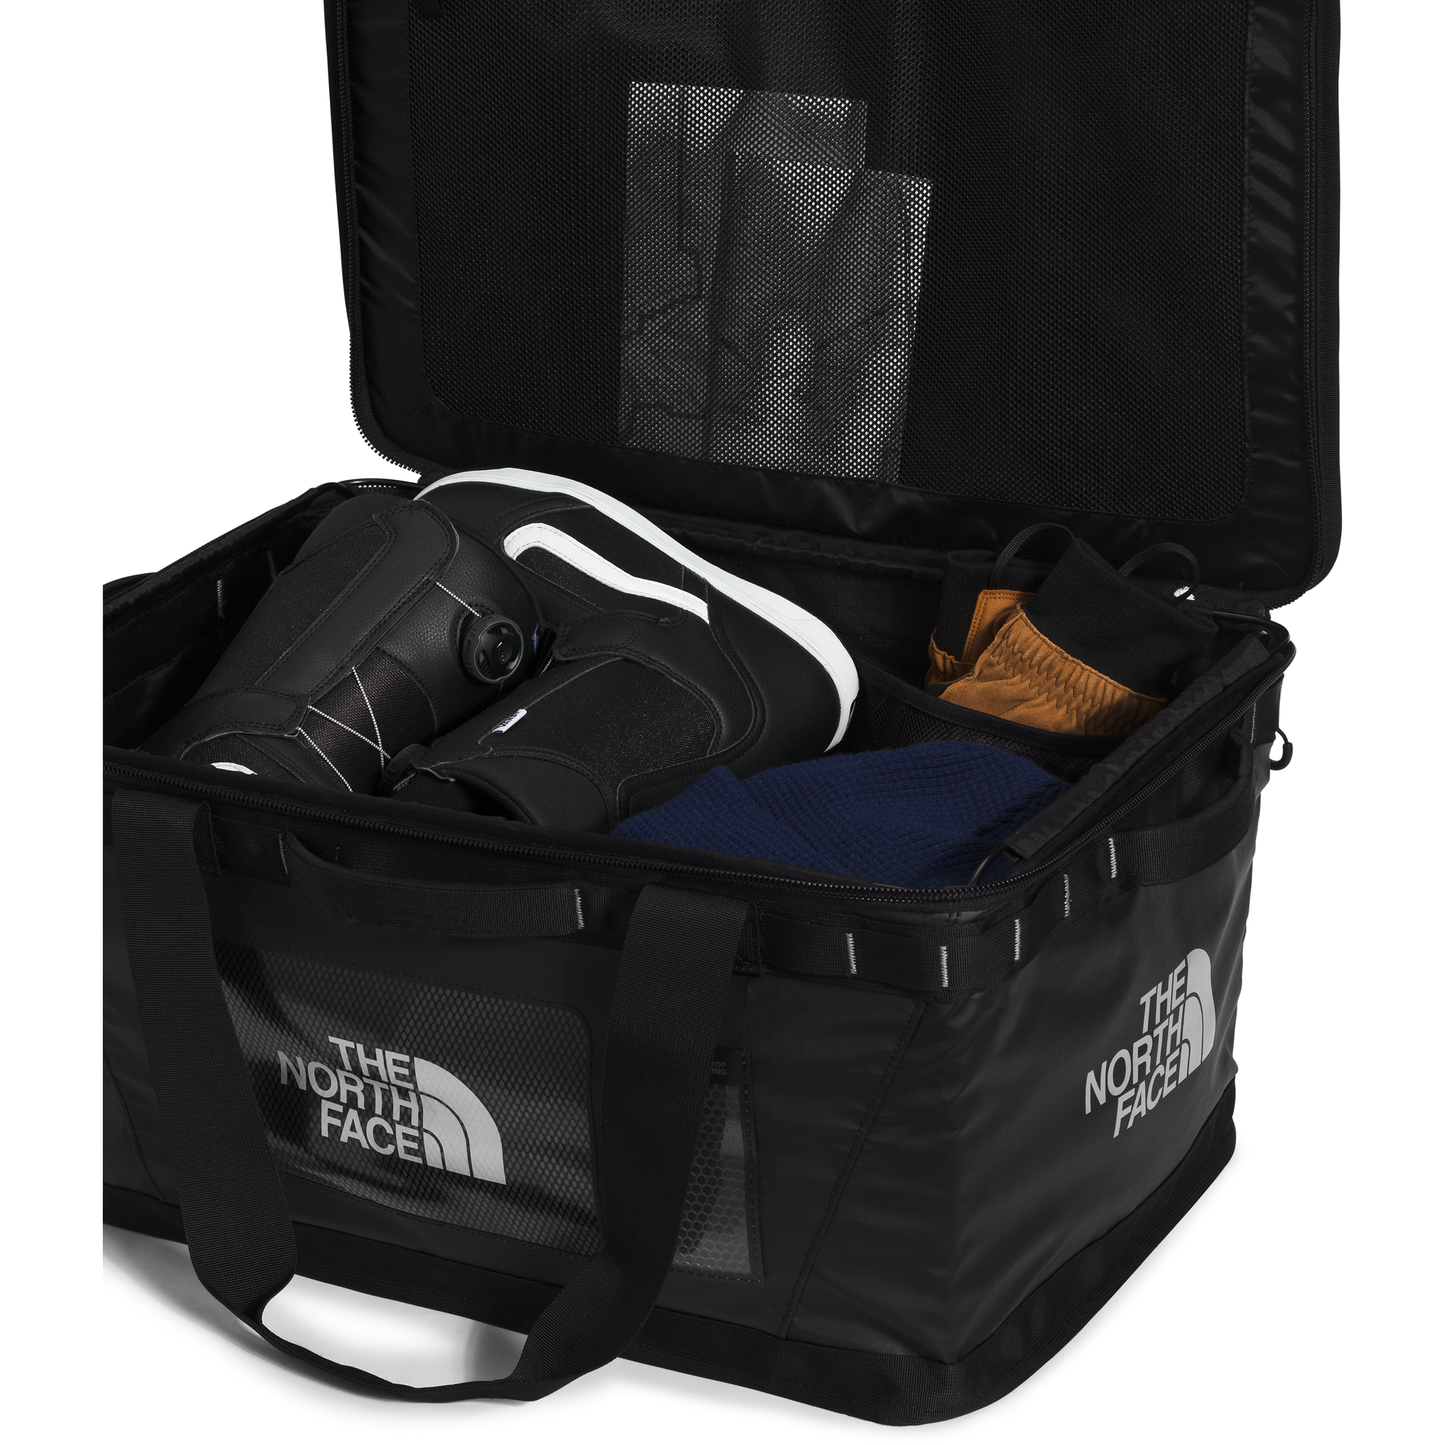 The North Face Cooler Bag One Size Base Camp Gear Box - M, TNF Black/TNF Black